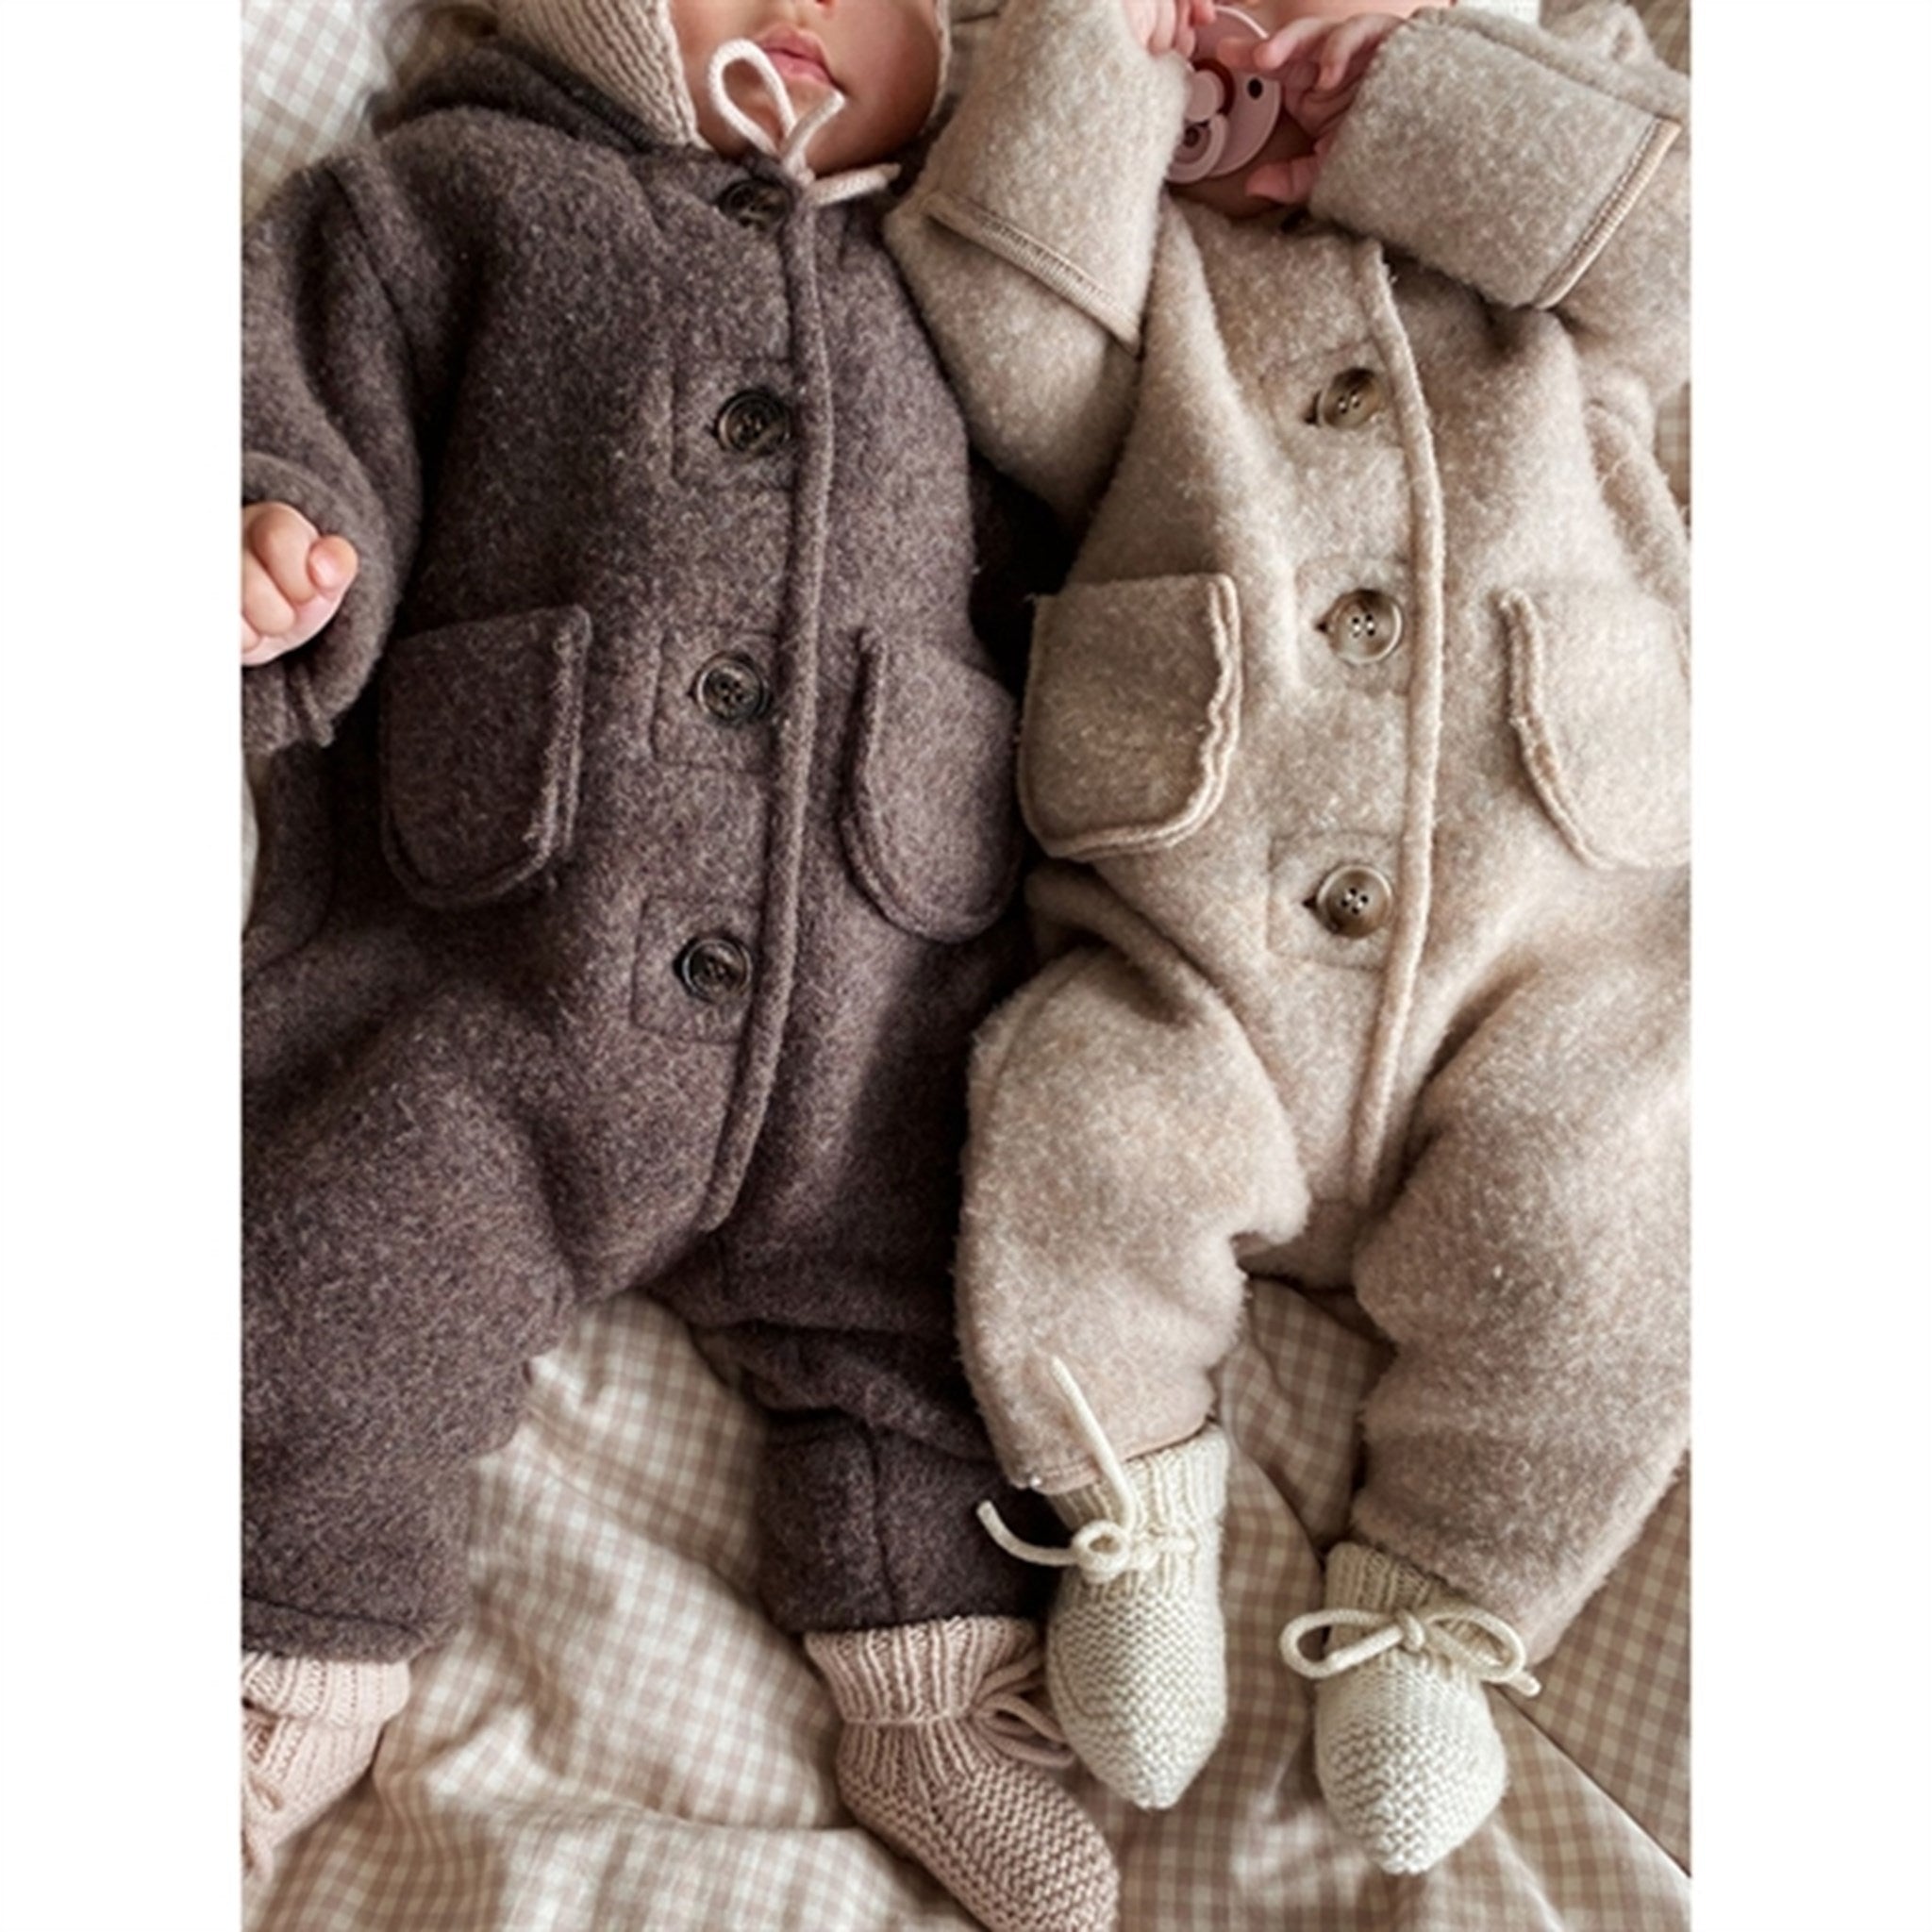 lalaby Oat Teddy Onesie 5